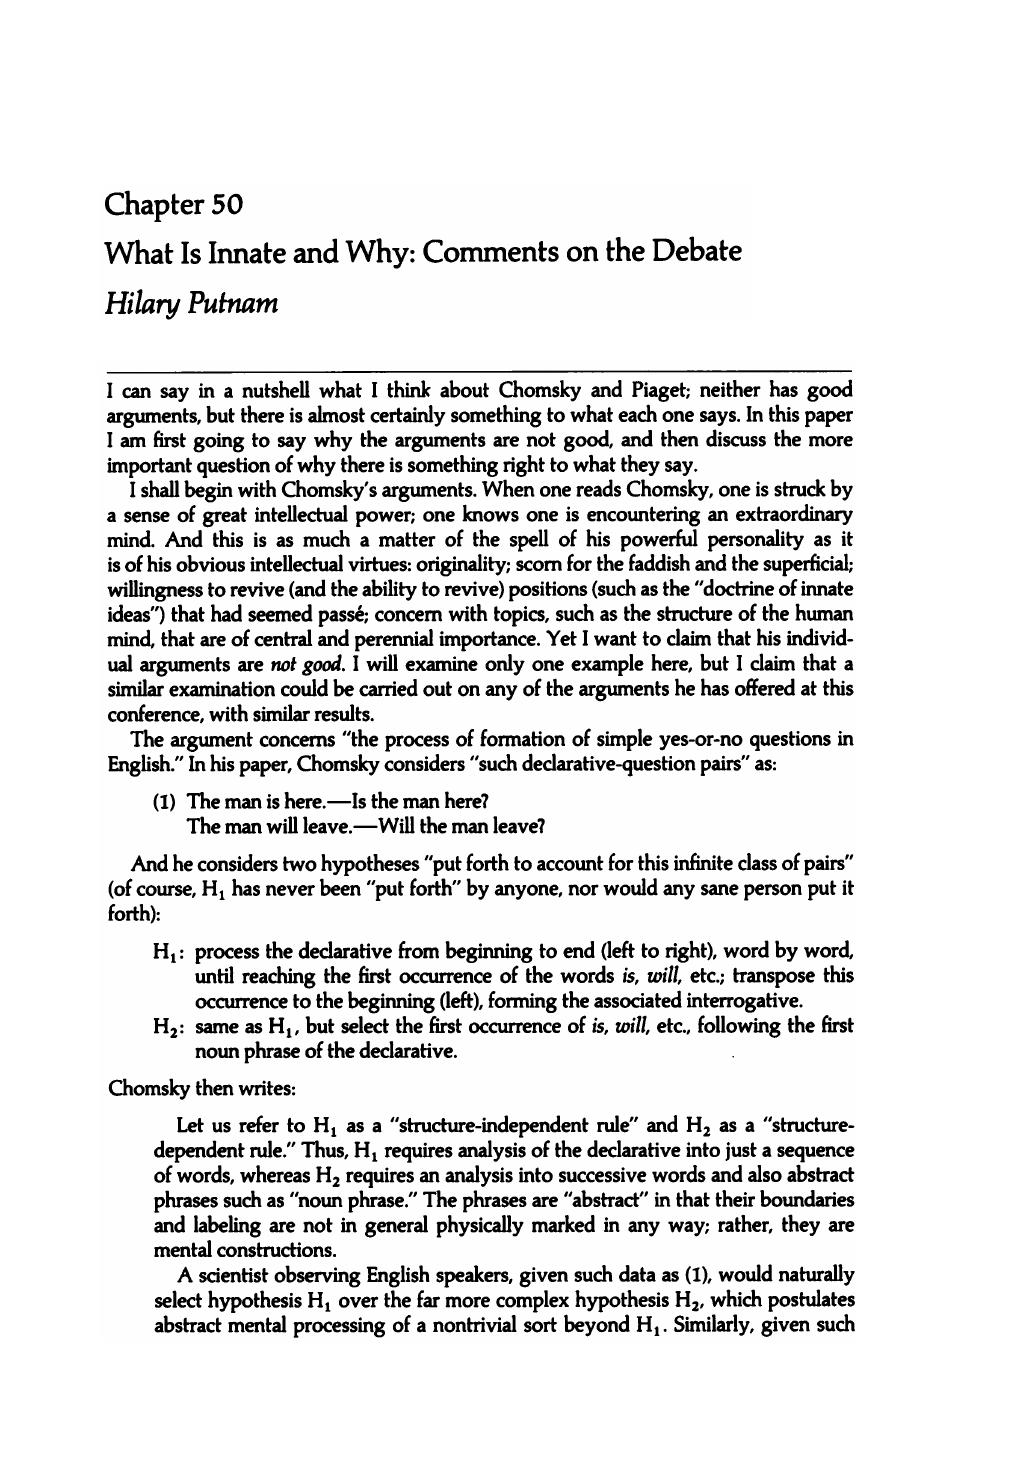 What Is Innate and Why: Comments on the Debate - Chapter 50